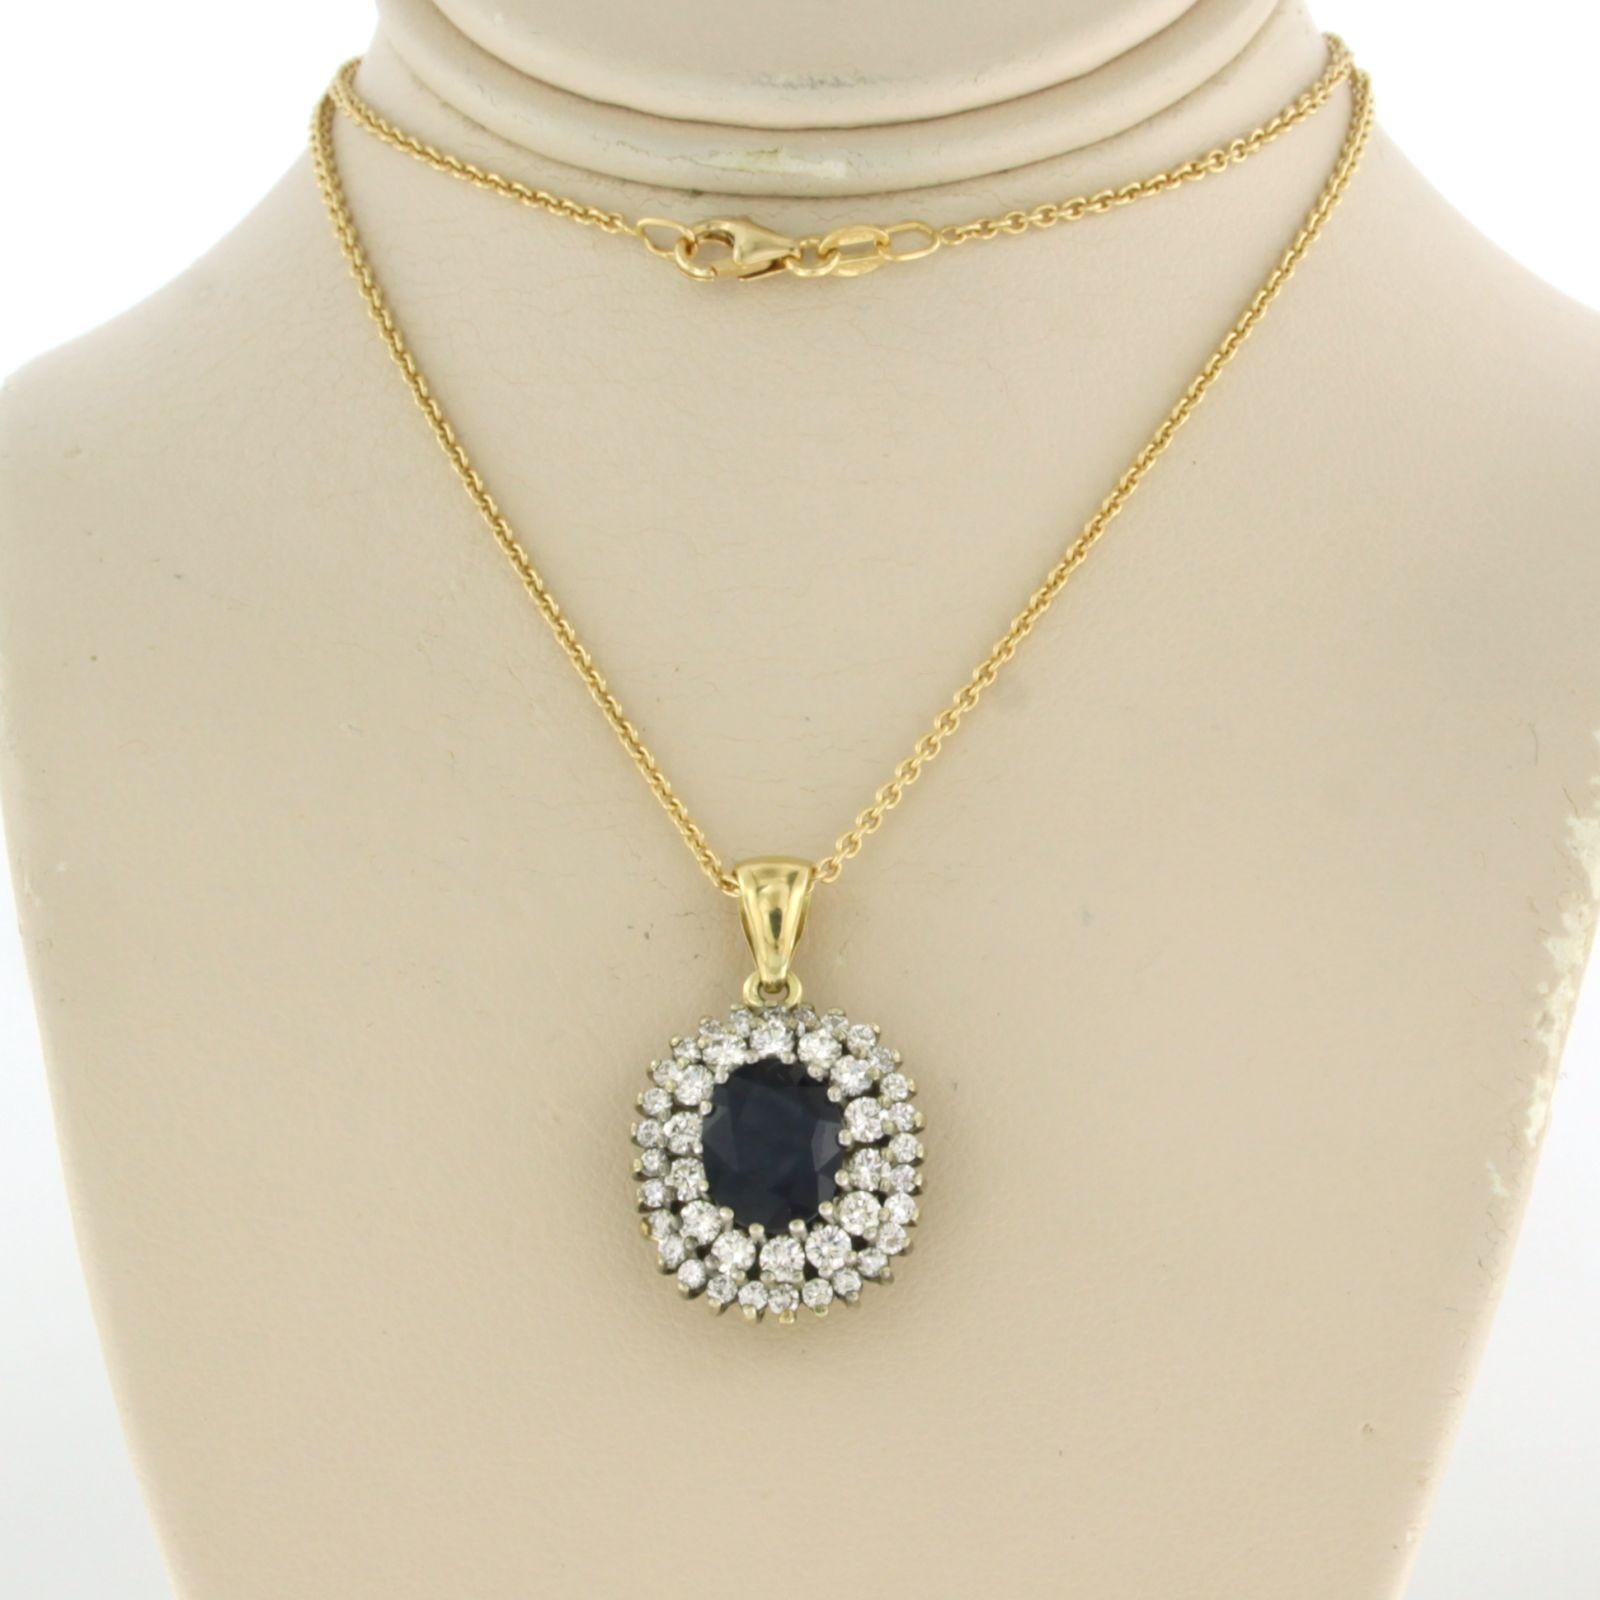 18k yellow gold necklace with a bicolor gold cluster pendant set with a central sapphire and surrounding brilliant cut diamonds. 1.00ct - G/H - VS/SI - 45 cm long

detailed description:

necklace is 45 cm long and 1.3 mm wide

Dimensions of the